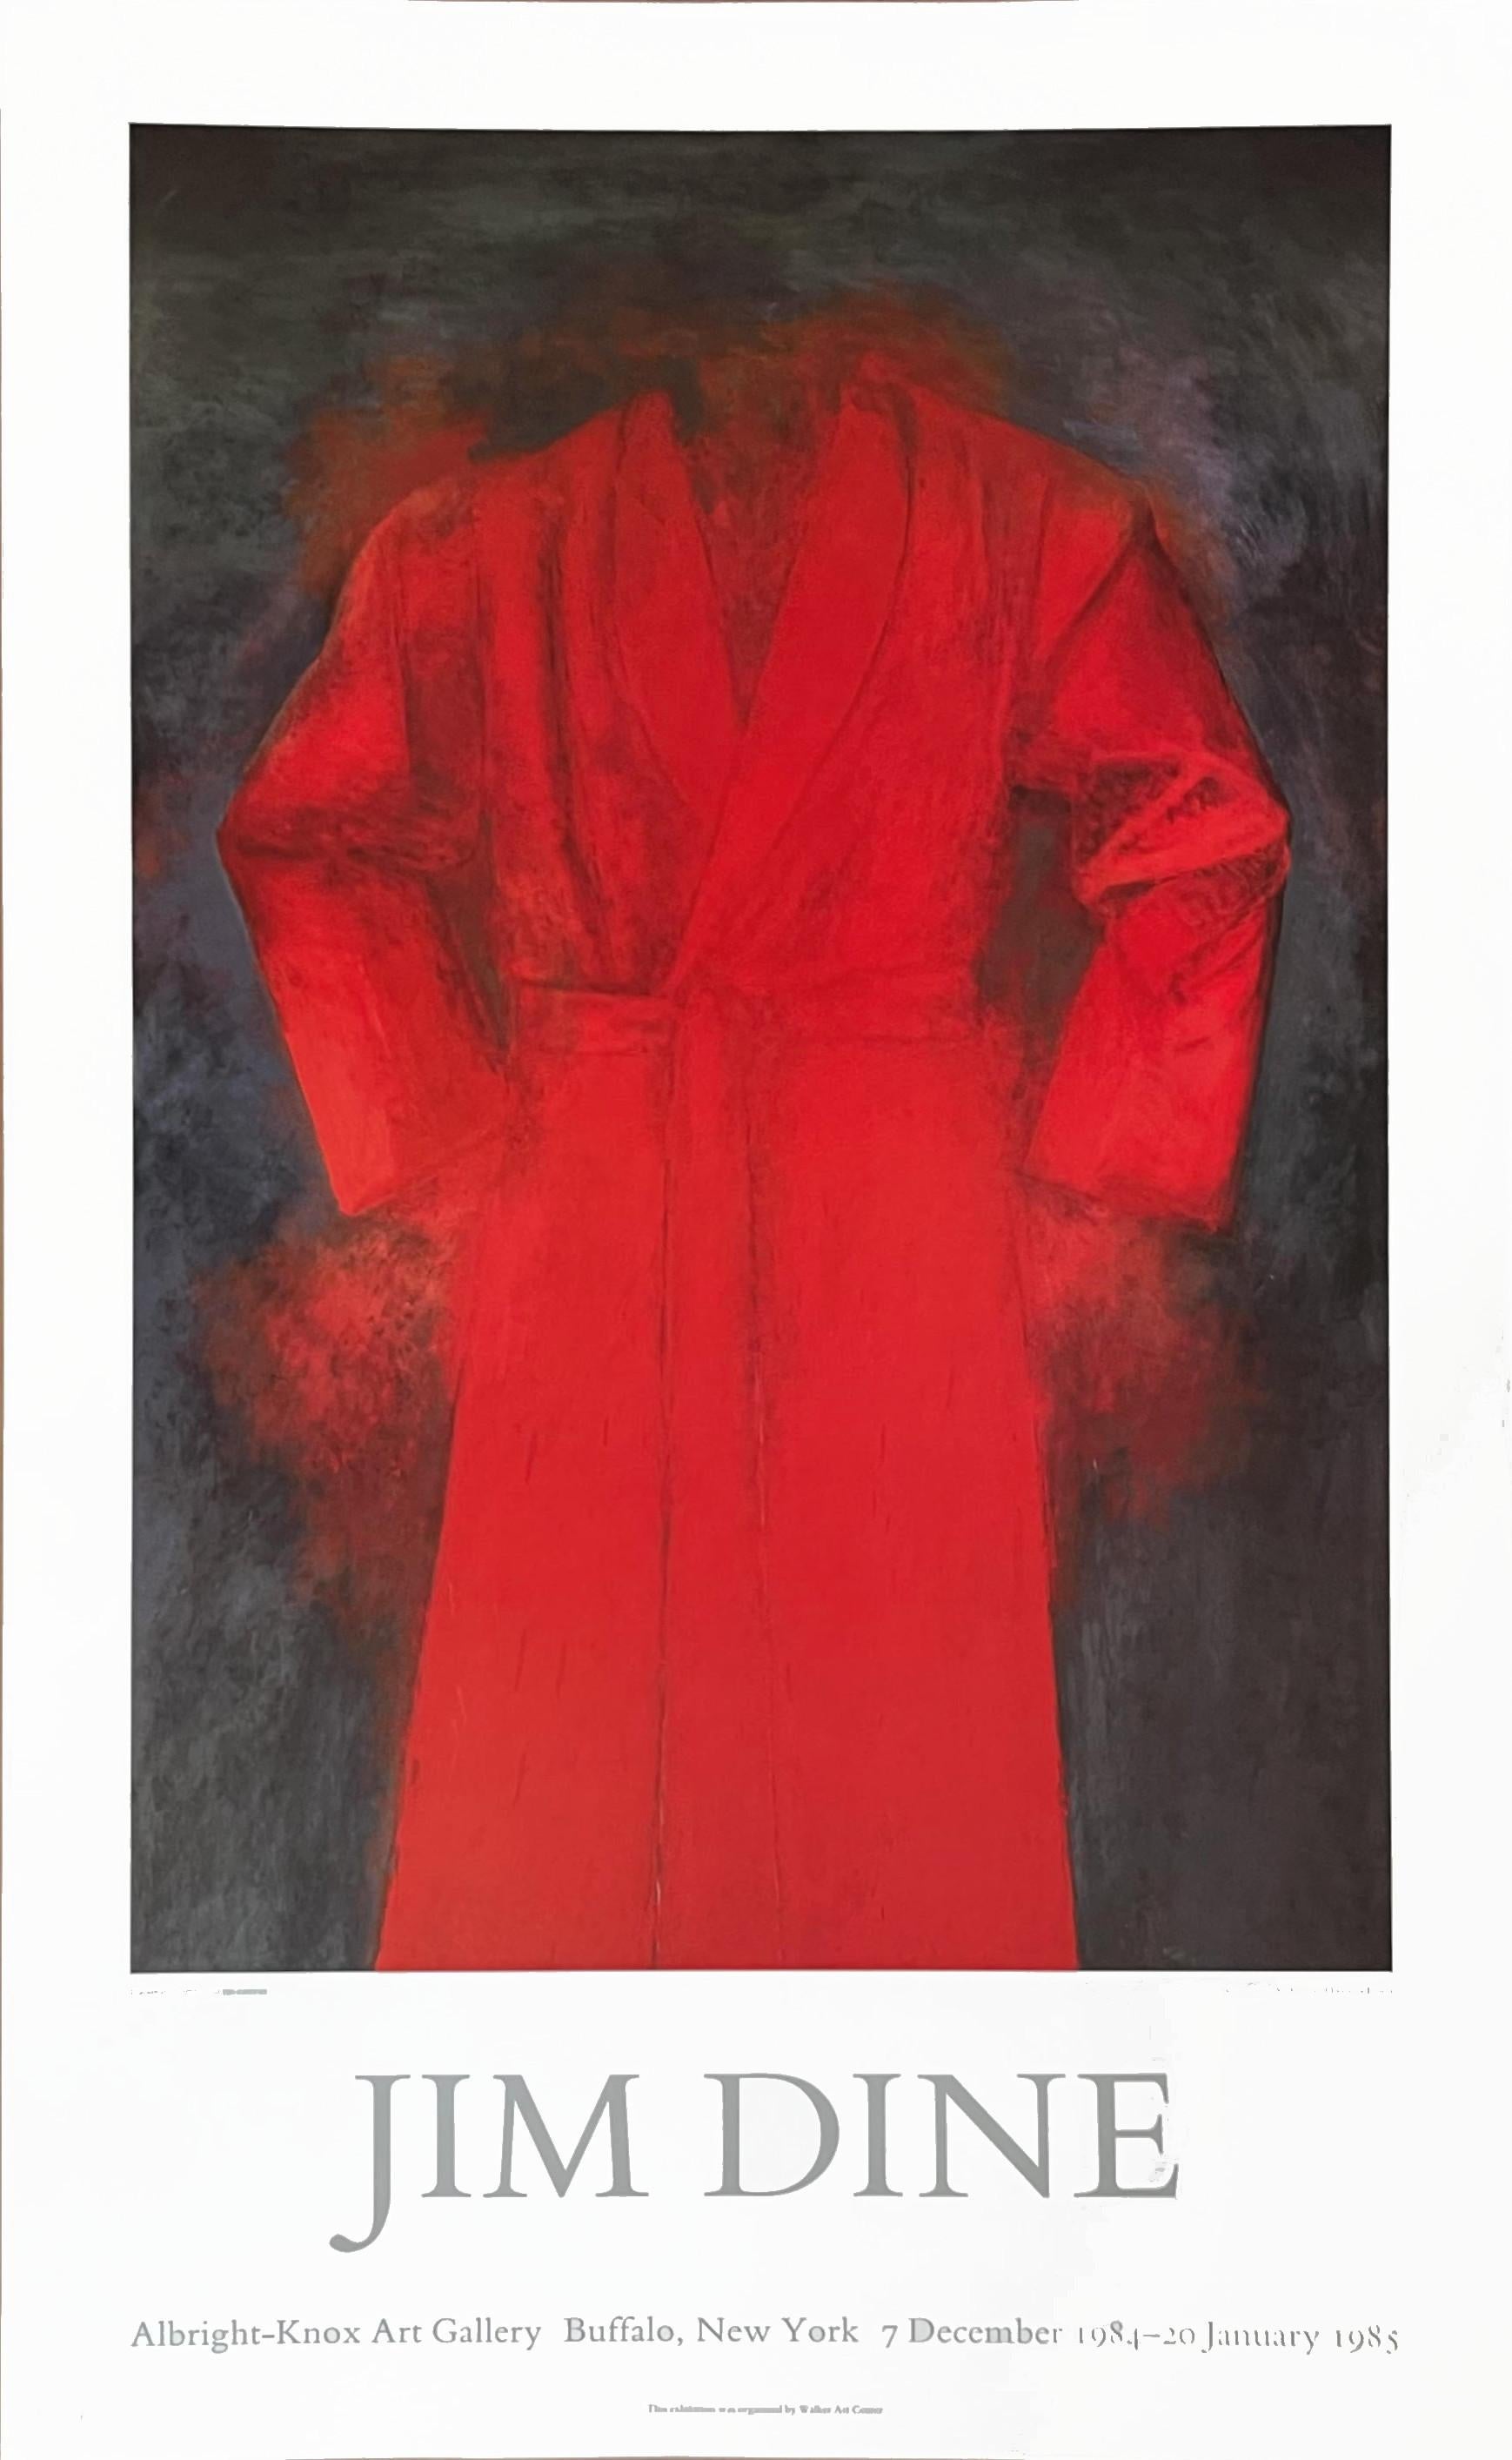 "Cardinal" - Jim Dine at Albright Knox poster, 1984
LARGE:  40 inches (vertical) x 24 inches (horizontal)
(Ships rolled in a tube measuring 36" x 6" )
Offset lithograph poster
Limited Edition of 500 (unnumbered; unsigned)
40 × 24